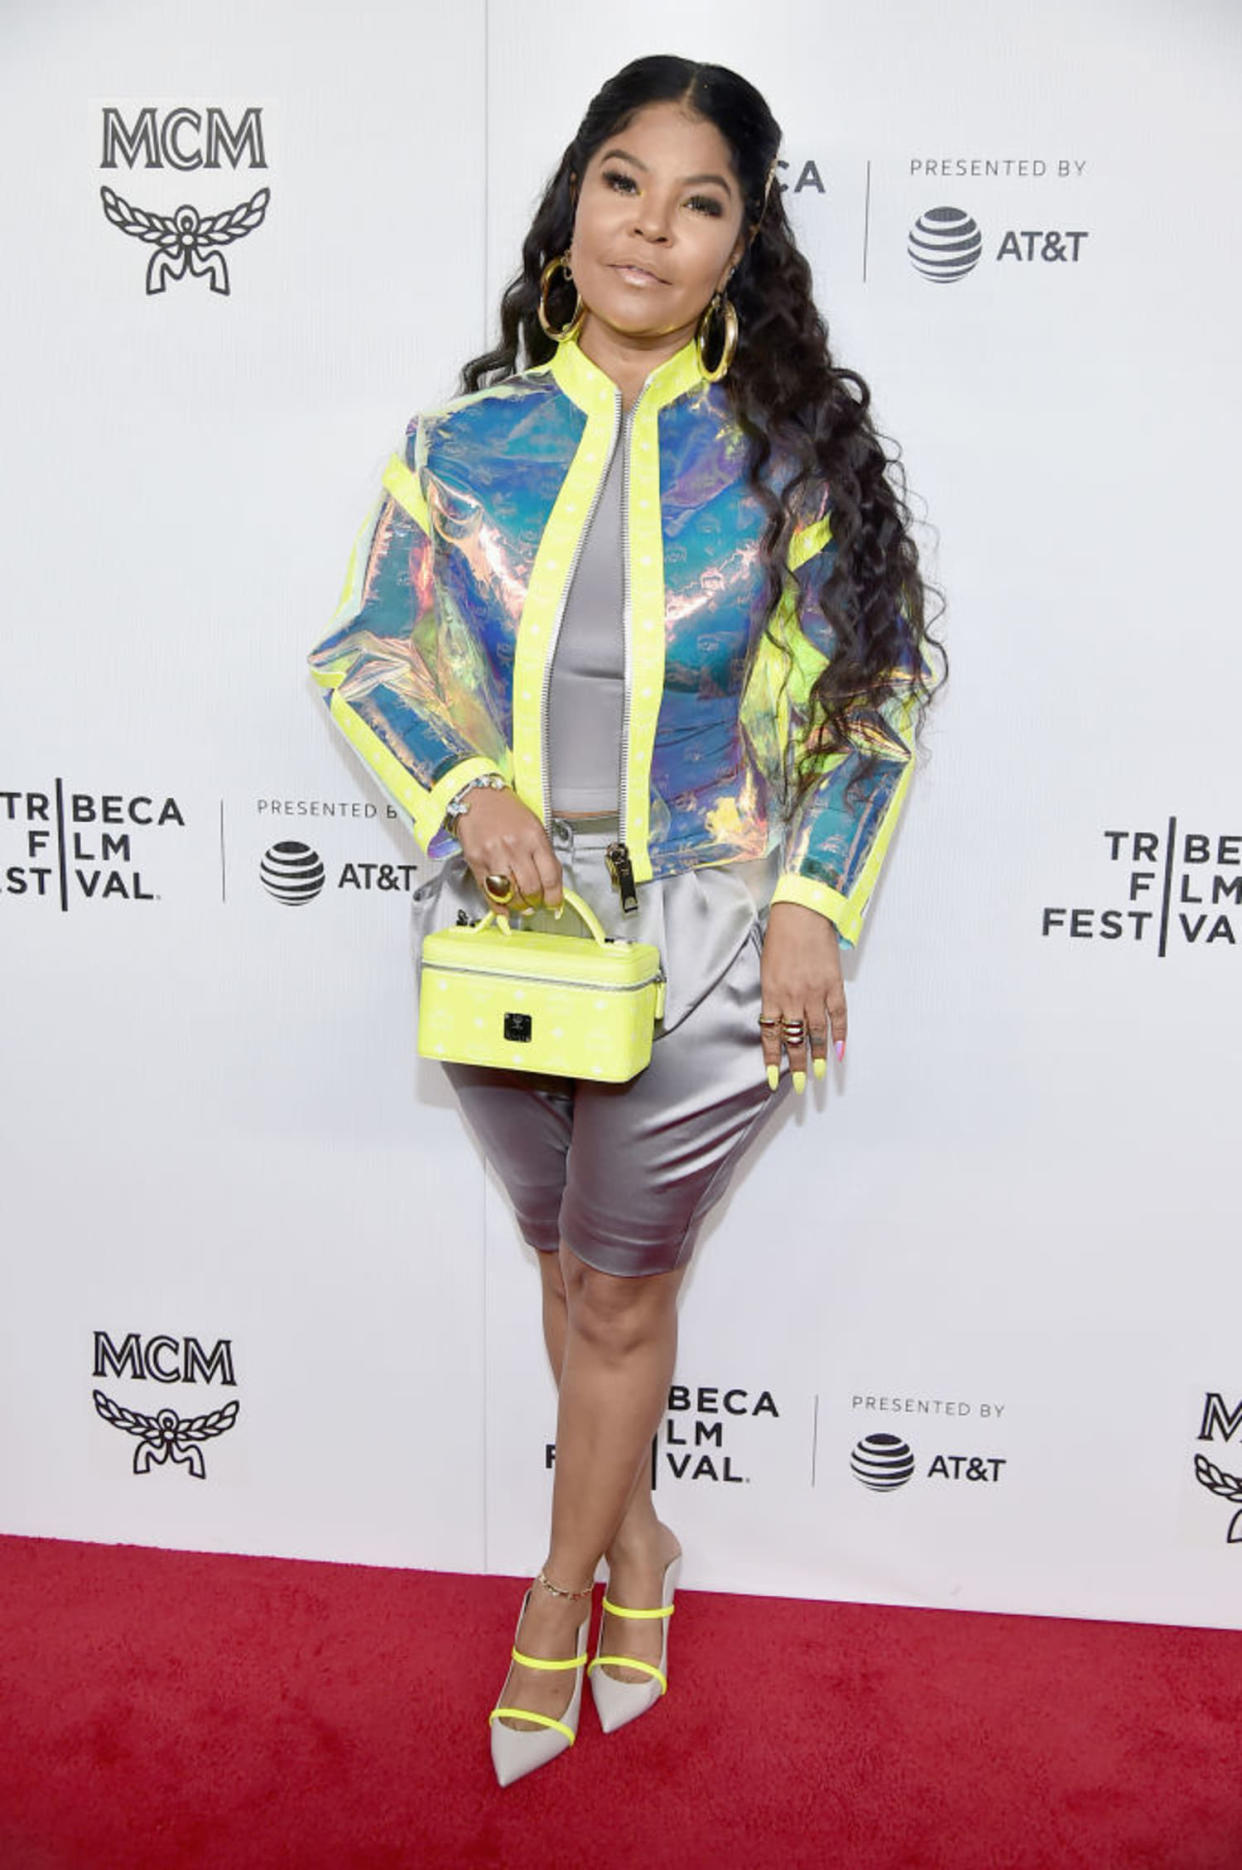 MCM Global Hosts Premiere Of “The Remix: Hip Hop X Fashion” At Tribeca Film Festival (Theo Wargo / Getty Images )